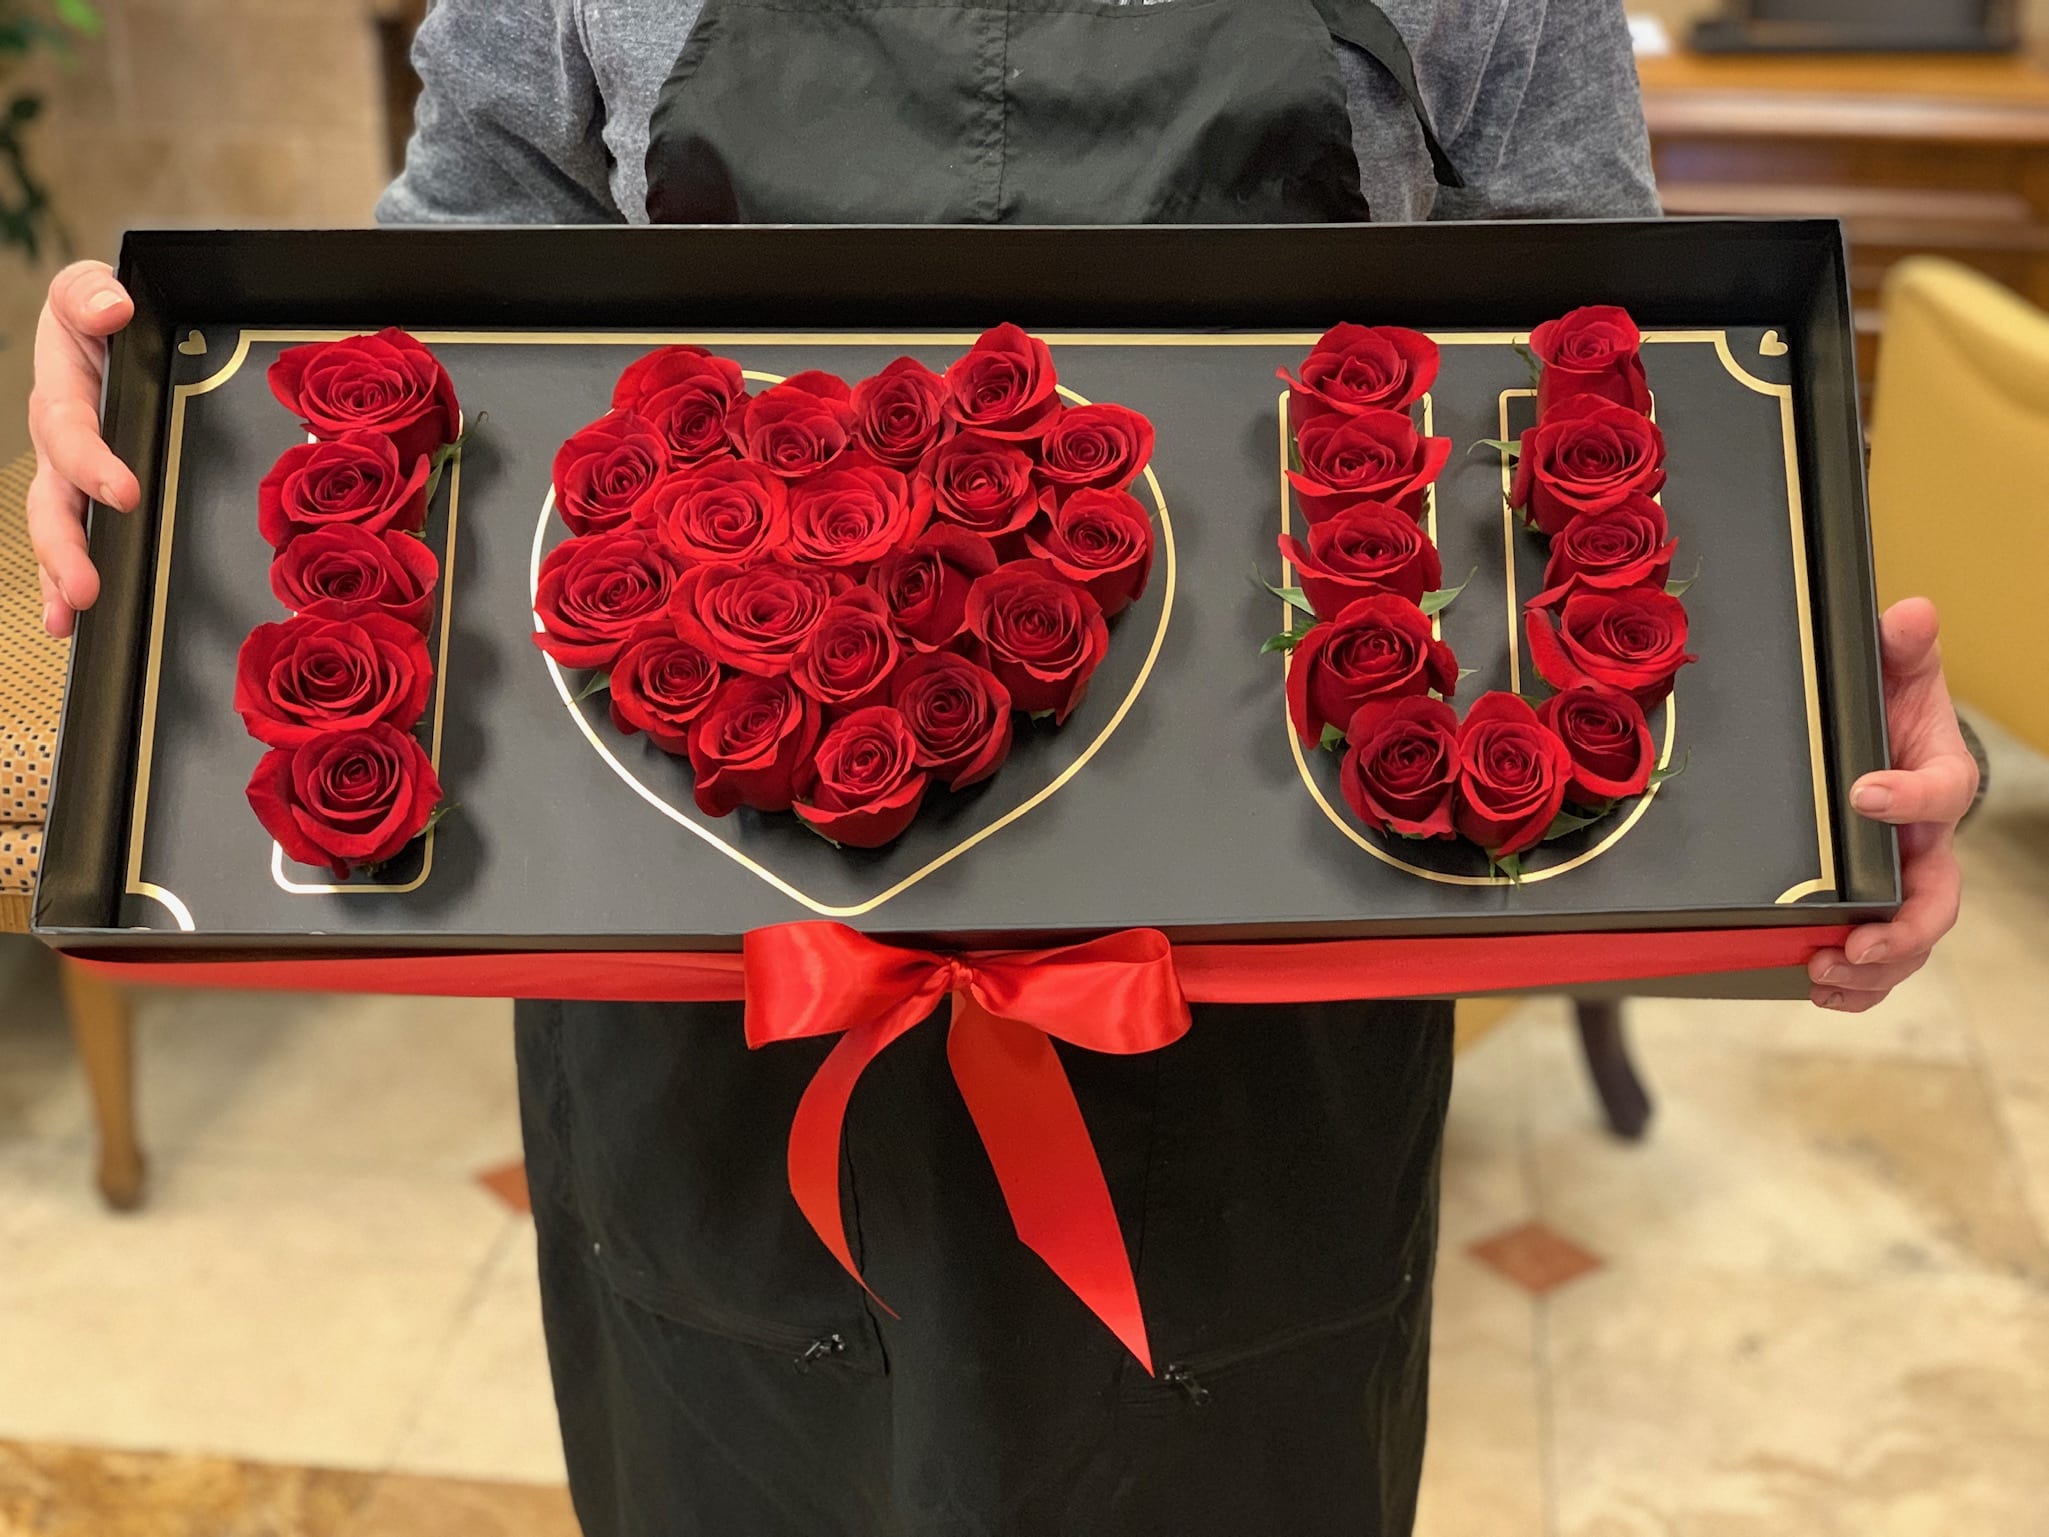 Deep Love Presentation Gift Box with Fresh Roses - Express your love with this beautiful presentation gift box  32-34 Fresh Red Roses.